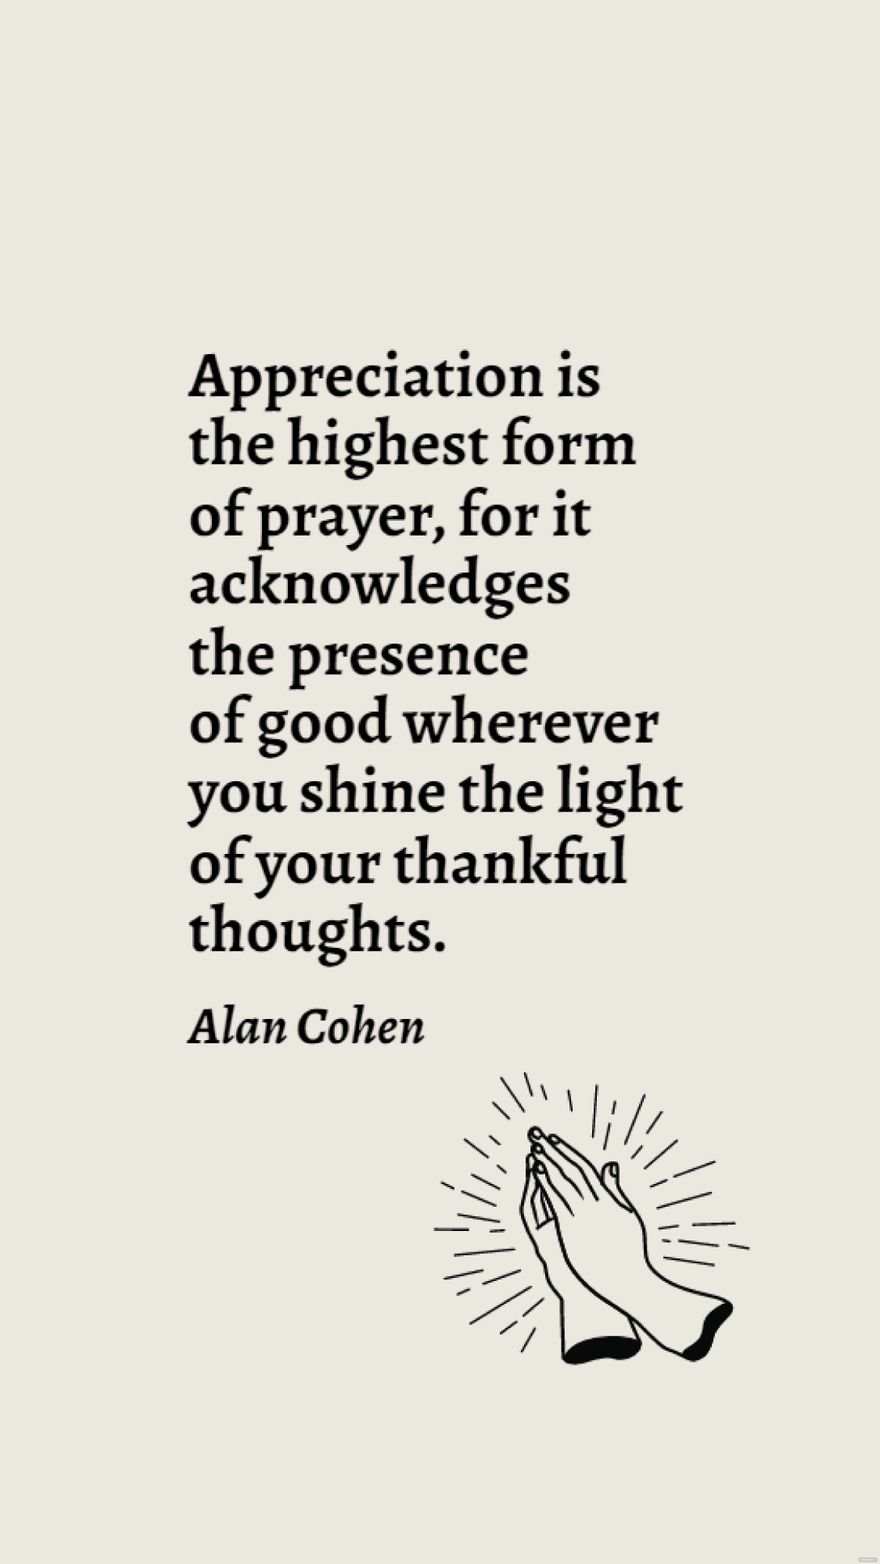 Free Alan Cohen - Appreciation is the highest form of prayer, for it acknowledges the presence of good wherever you shine the light of your thankful thoughts. in JPG